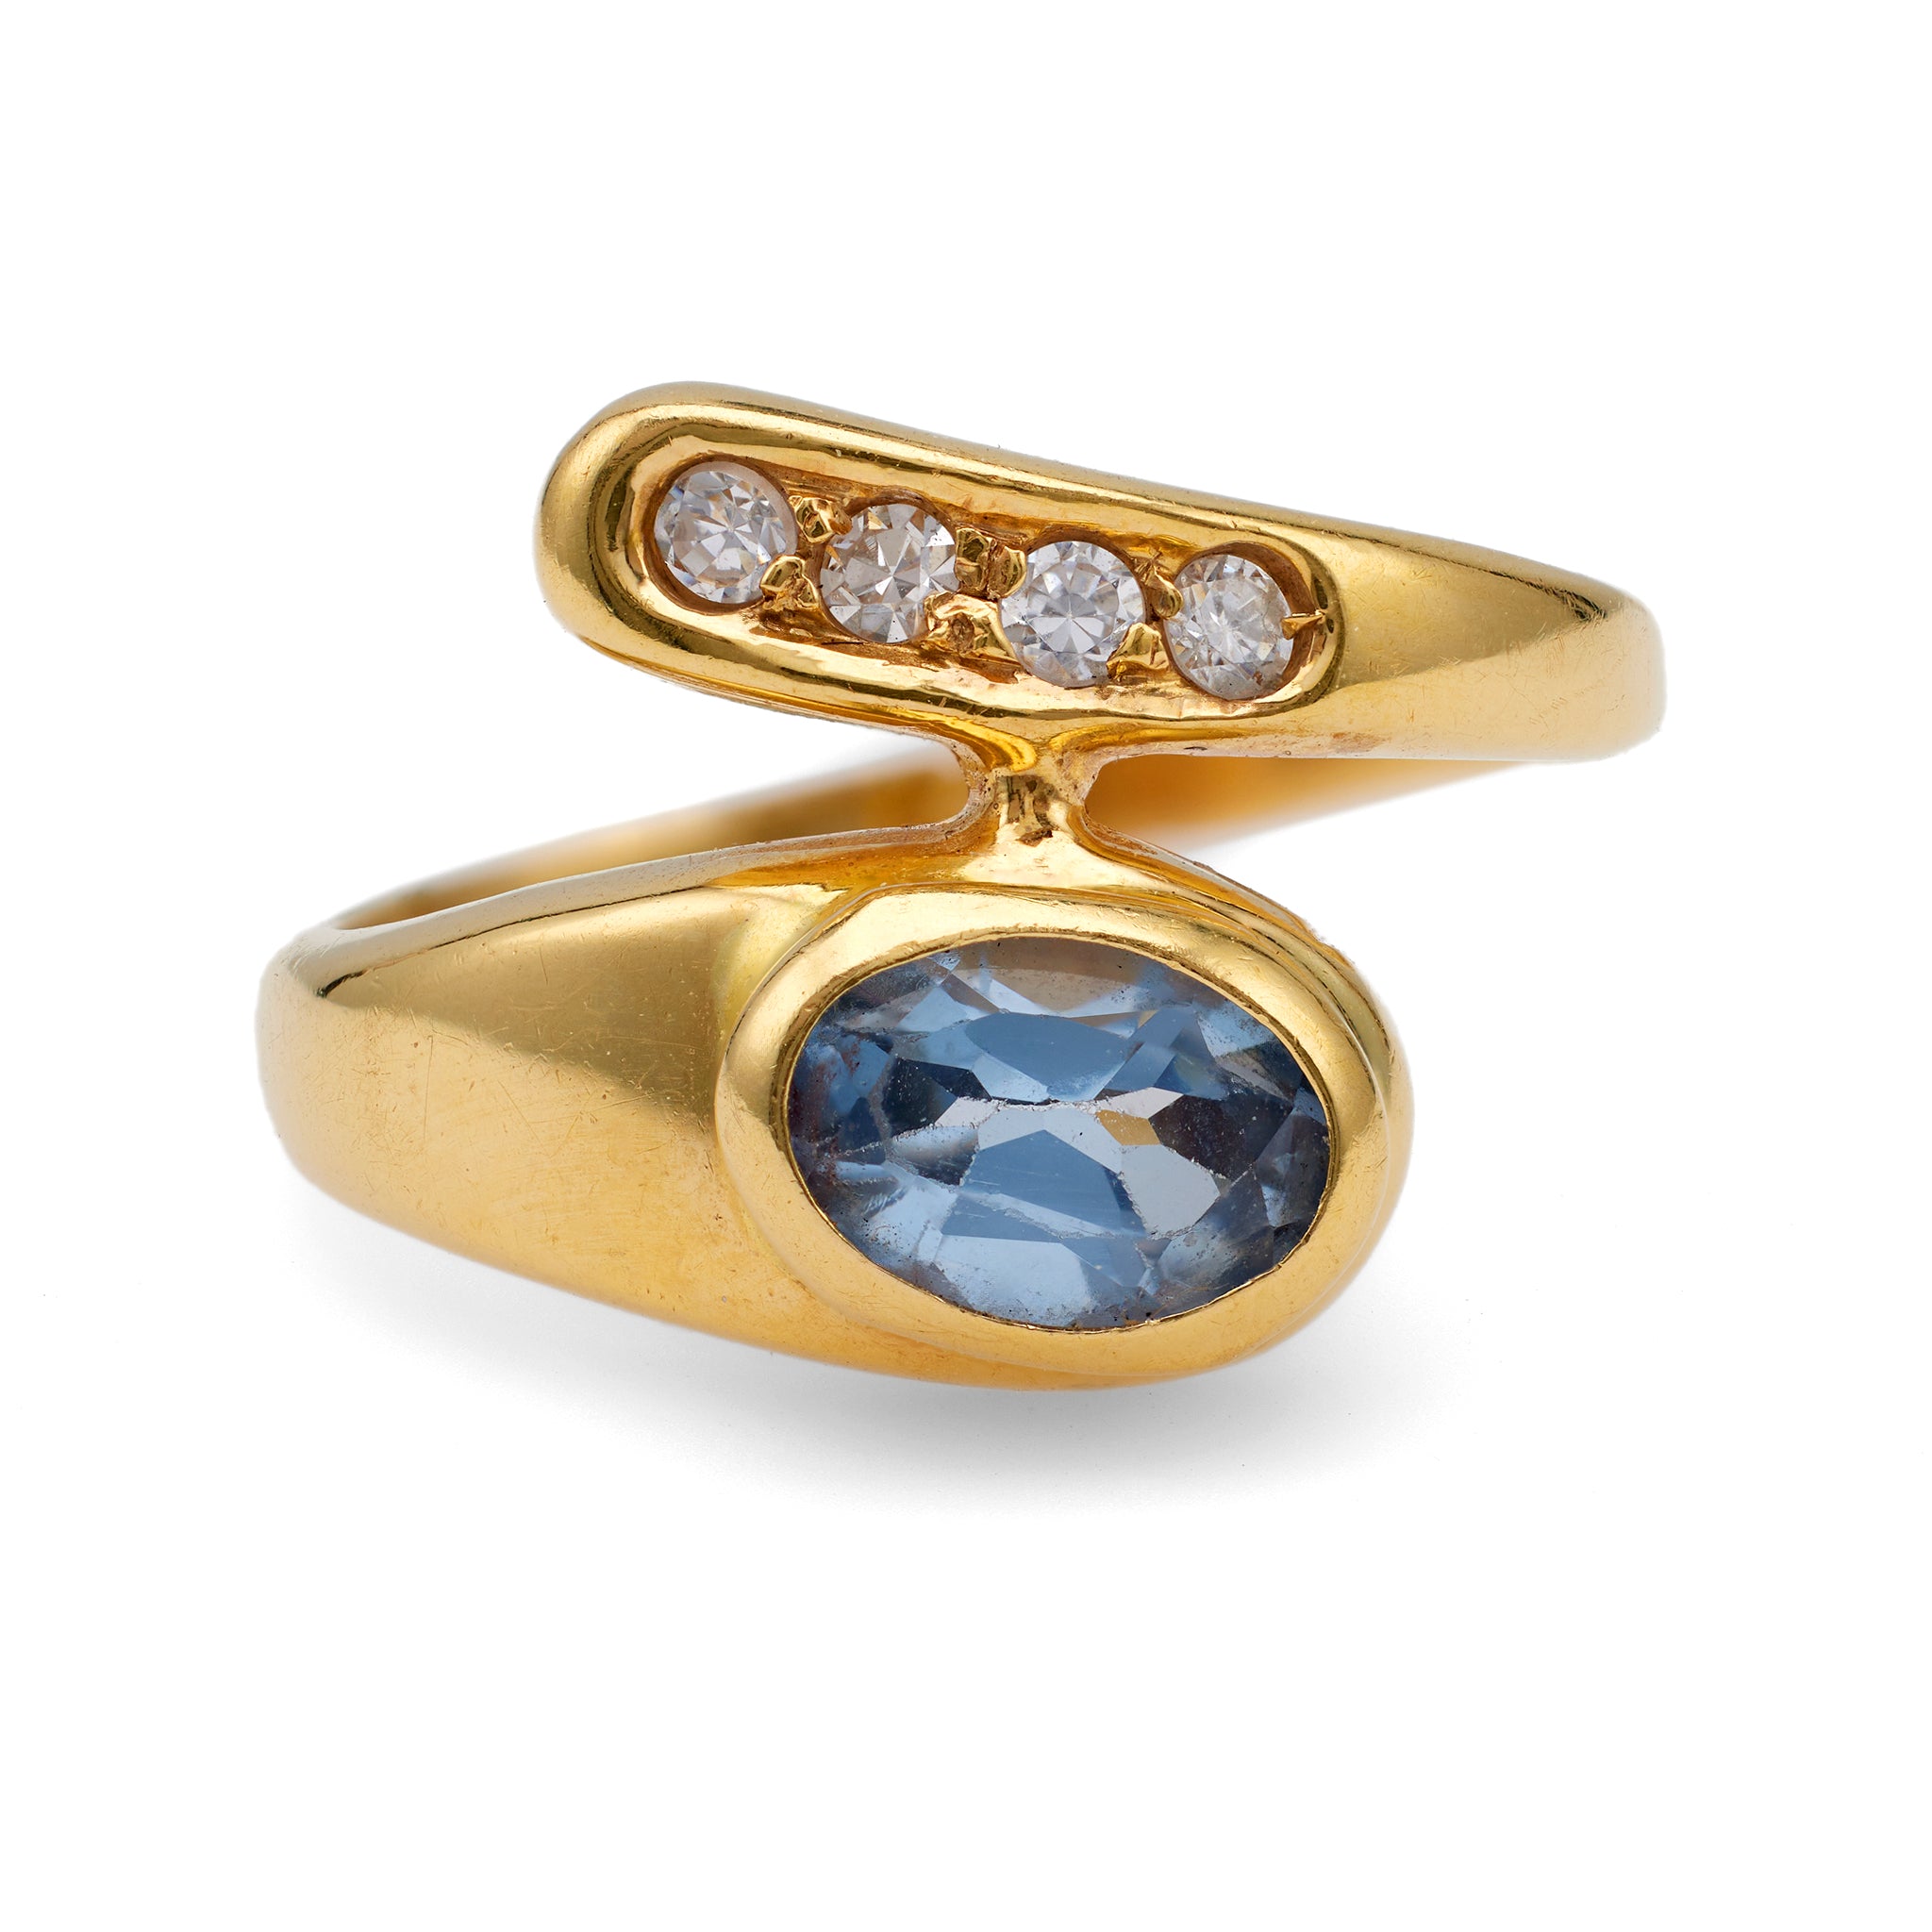 Retro Synthetic Spinel 18k Yellow Gold Ring